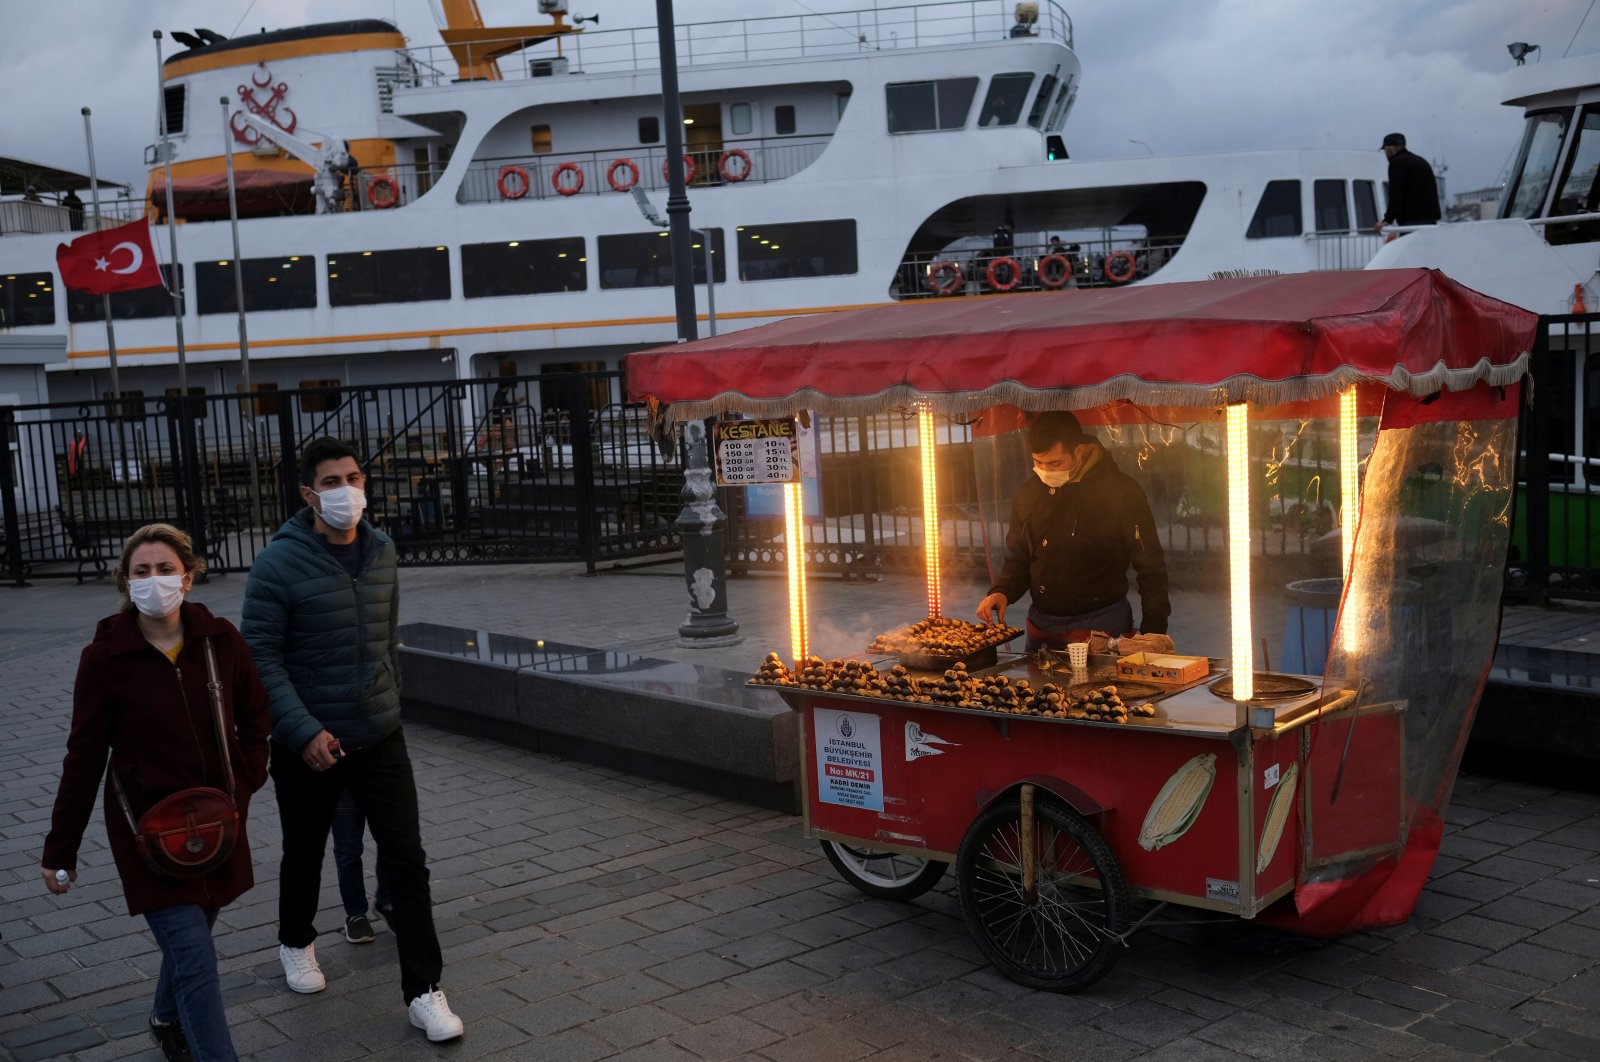 People wearing protective masks walk past a street vendor selling roasted chestnuts in Istanbul, Turkey, Nov. 10, 2020. (Reuters Photo)